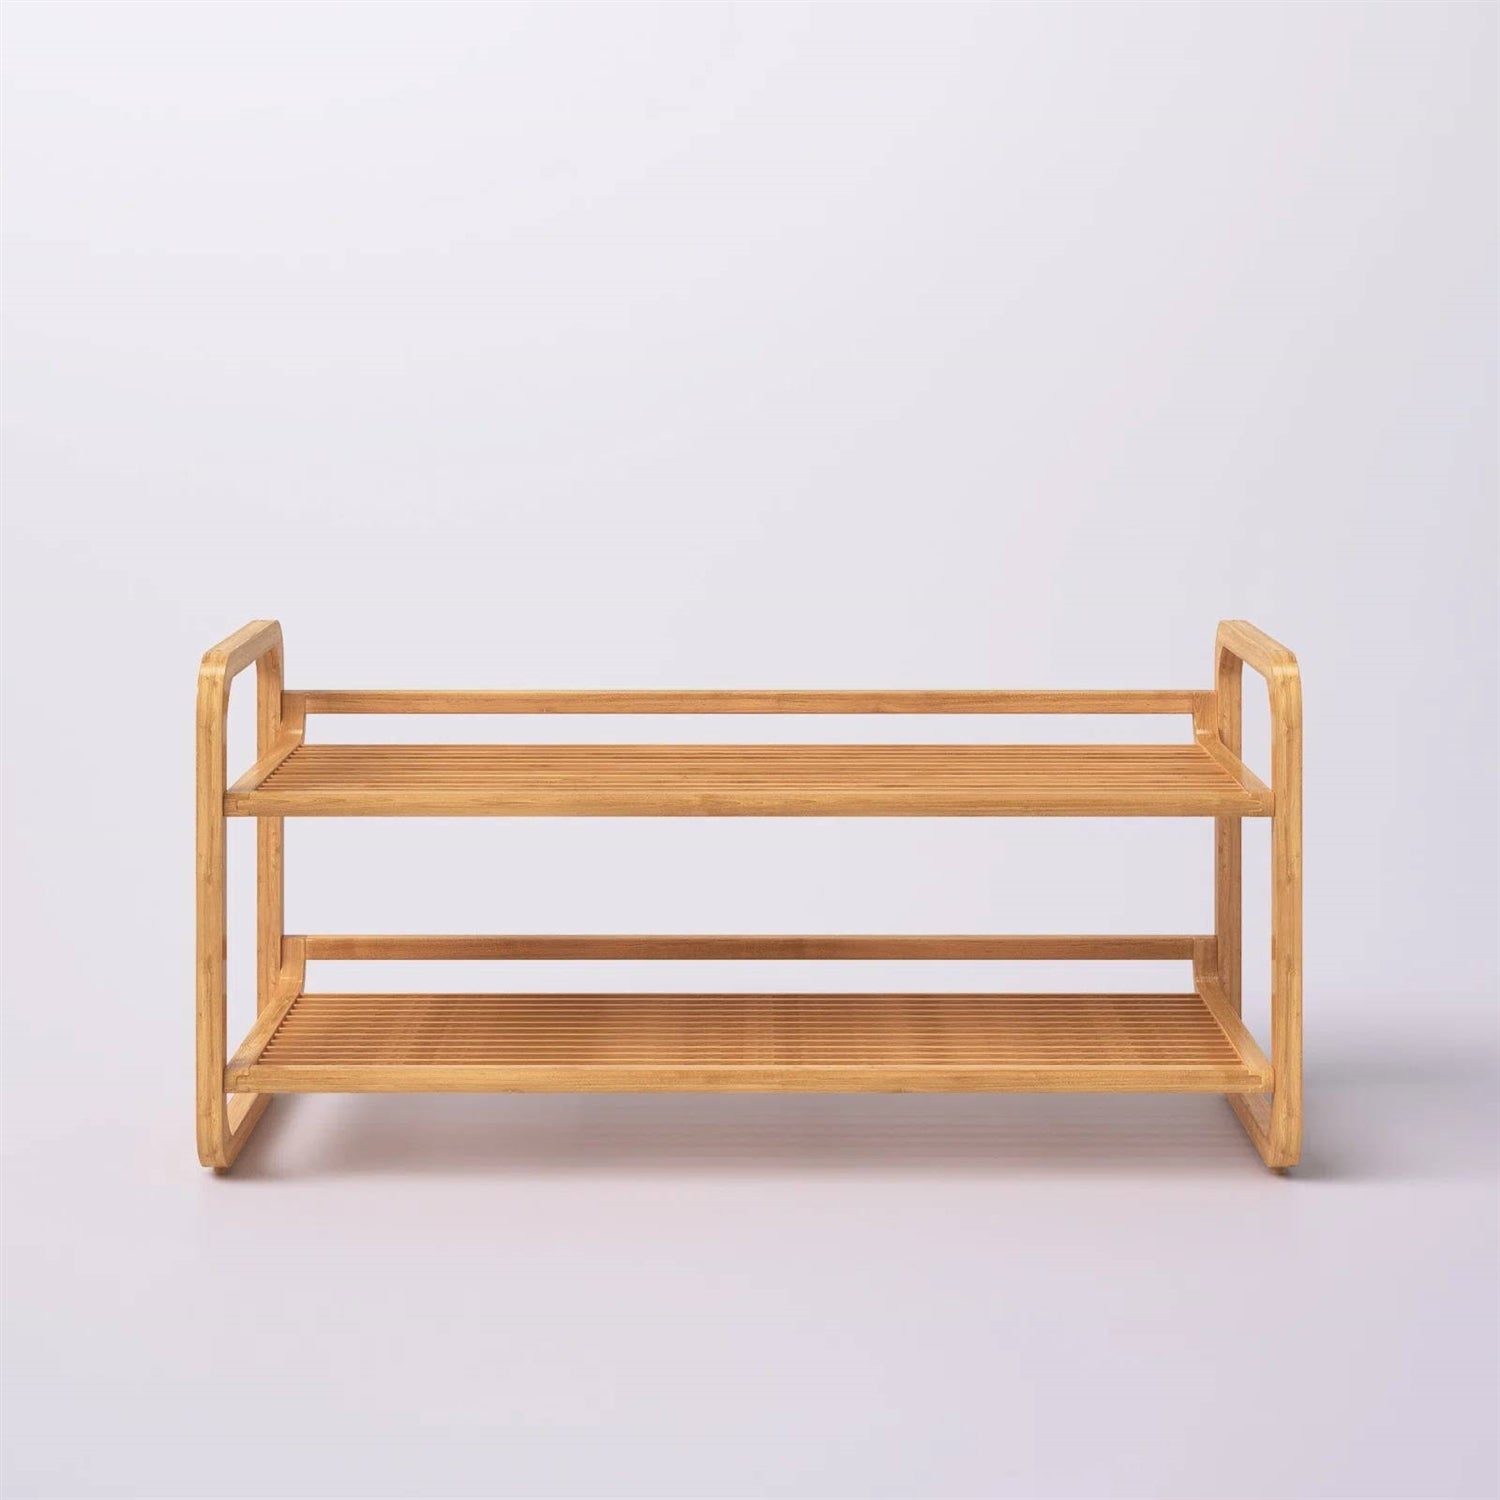 Accents > Shoe Racks - Bamboo Modern 2-Shelf Stackable Shoe Rack - Holds Up To 8 Pair Of Shoes